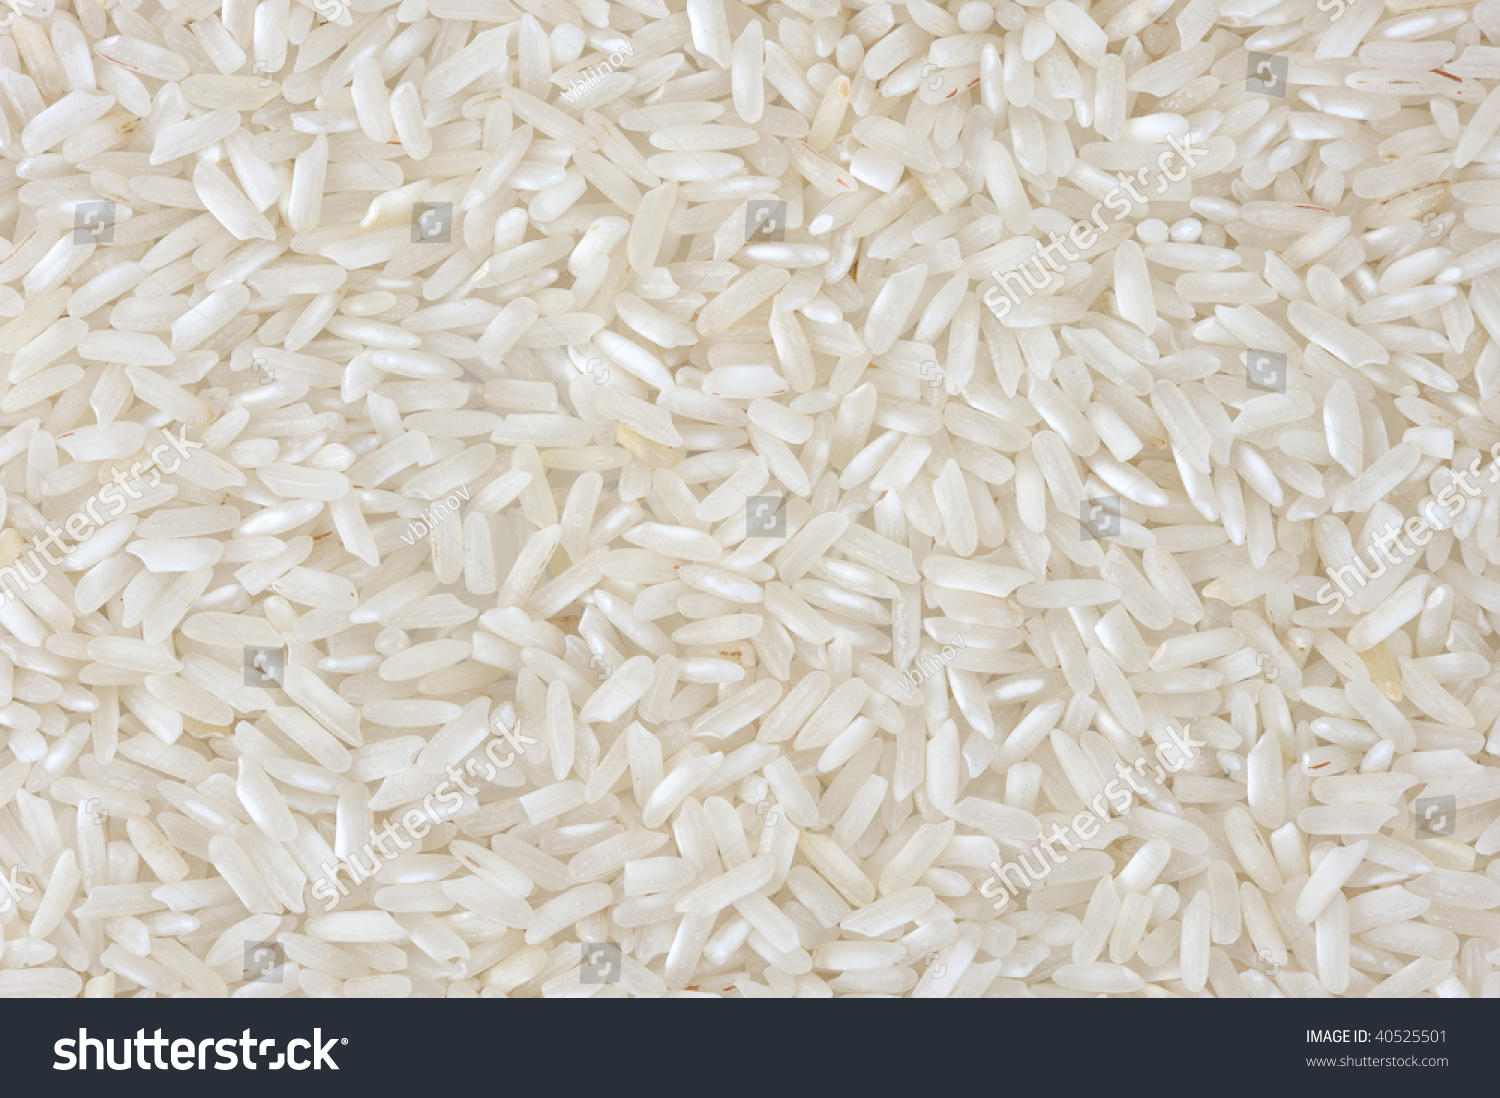 Grains Of Rice Close Up. Stock Photo 40525501 : Shutterstock